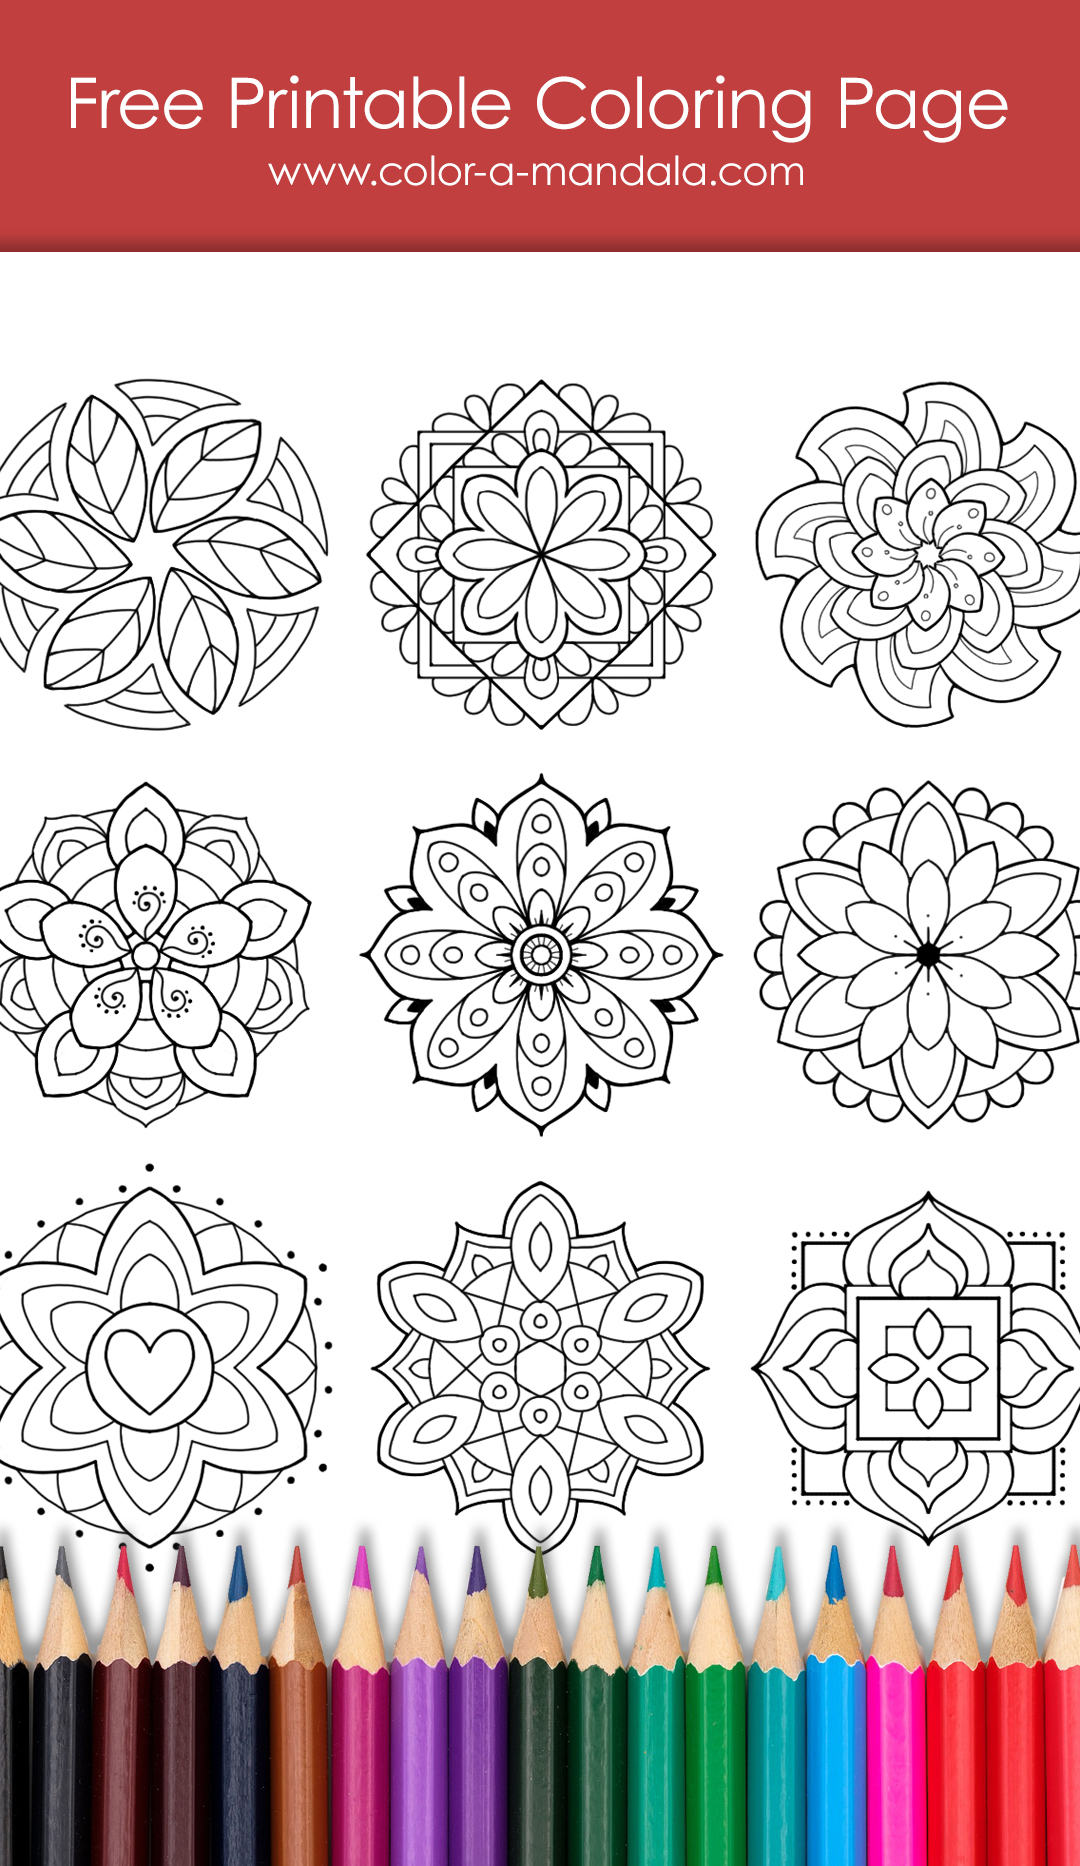 Image of a coloring page with 9 small mandalas on it and the text free printable coloring page.